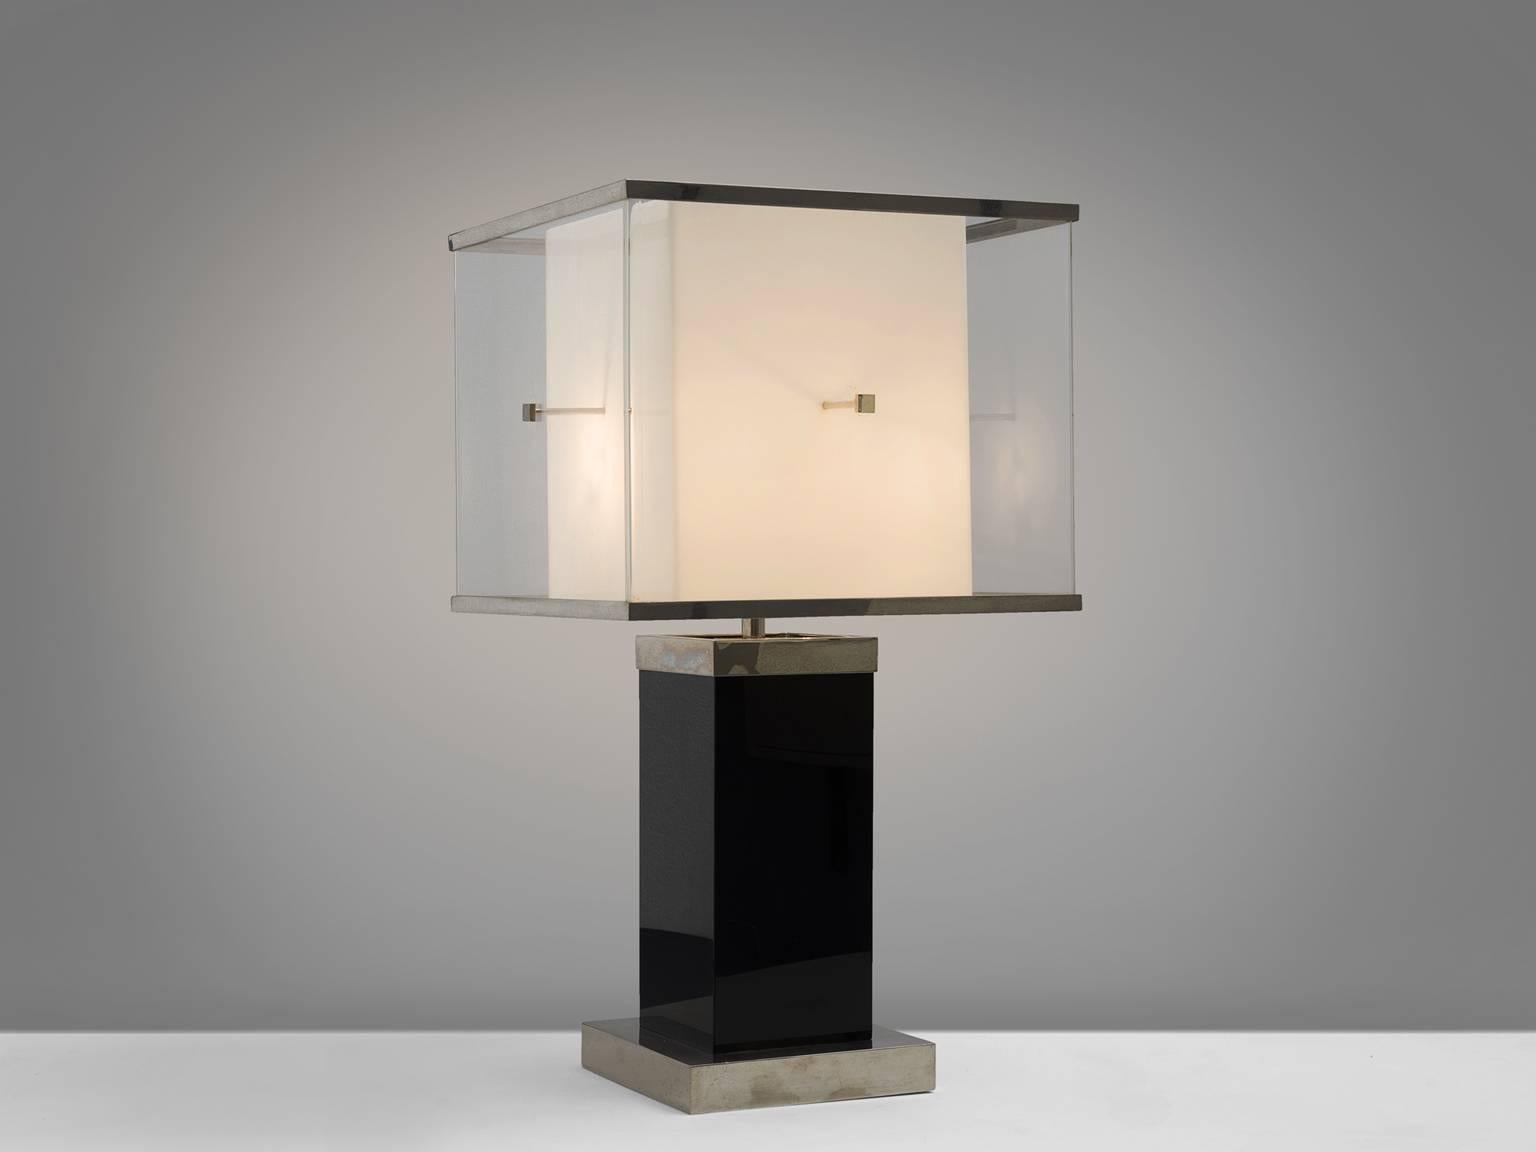 Romeo Rega, floor lamp, Lucite, Italy, 1970s.

This sculptural, cubical floor lamp features a small white base on which a deep black foot rests. On top of the black and white base stands a large shade. The design is typical for postwar, postmodern